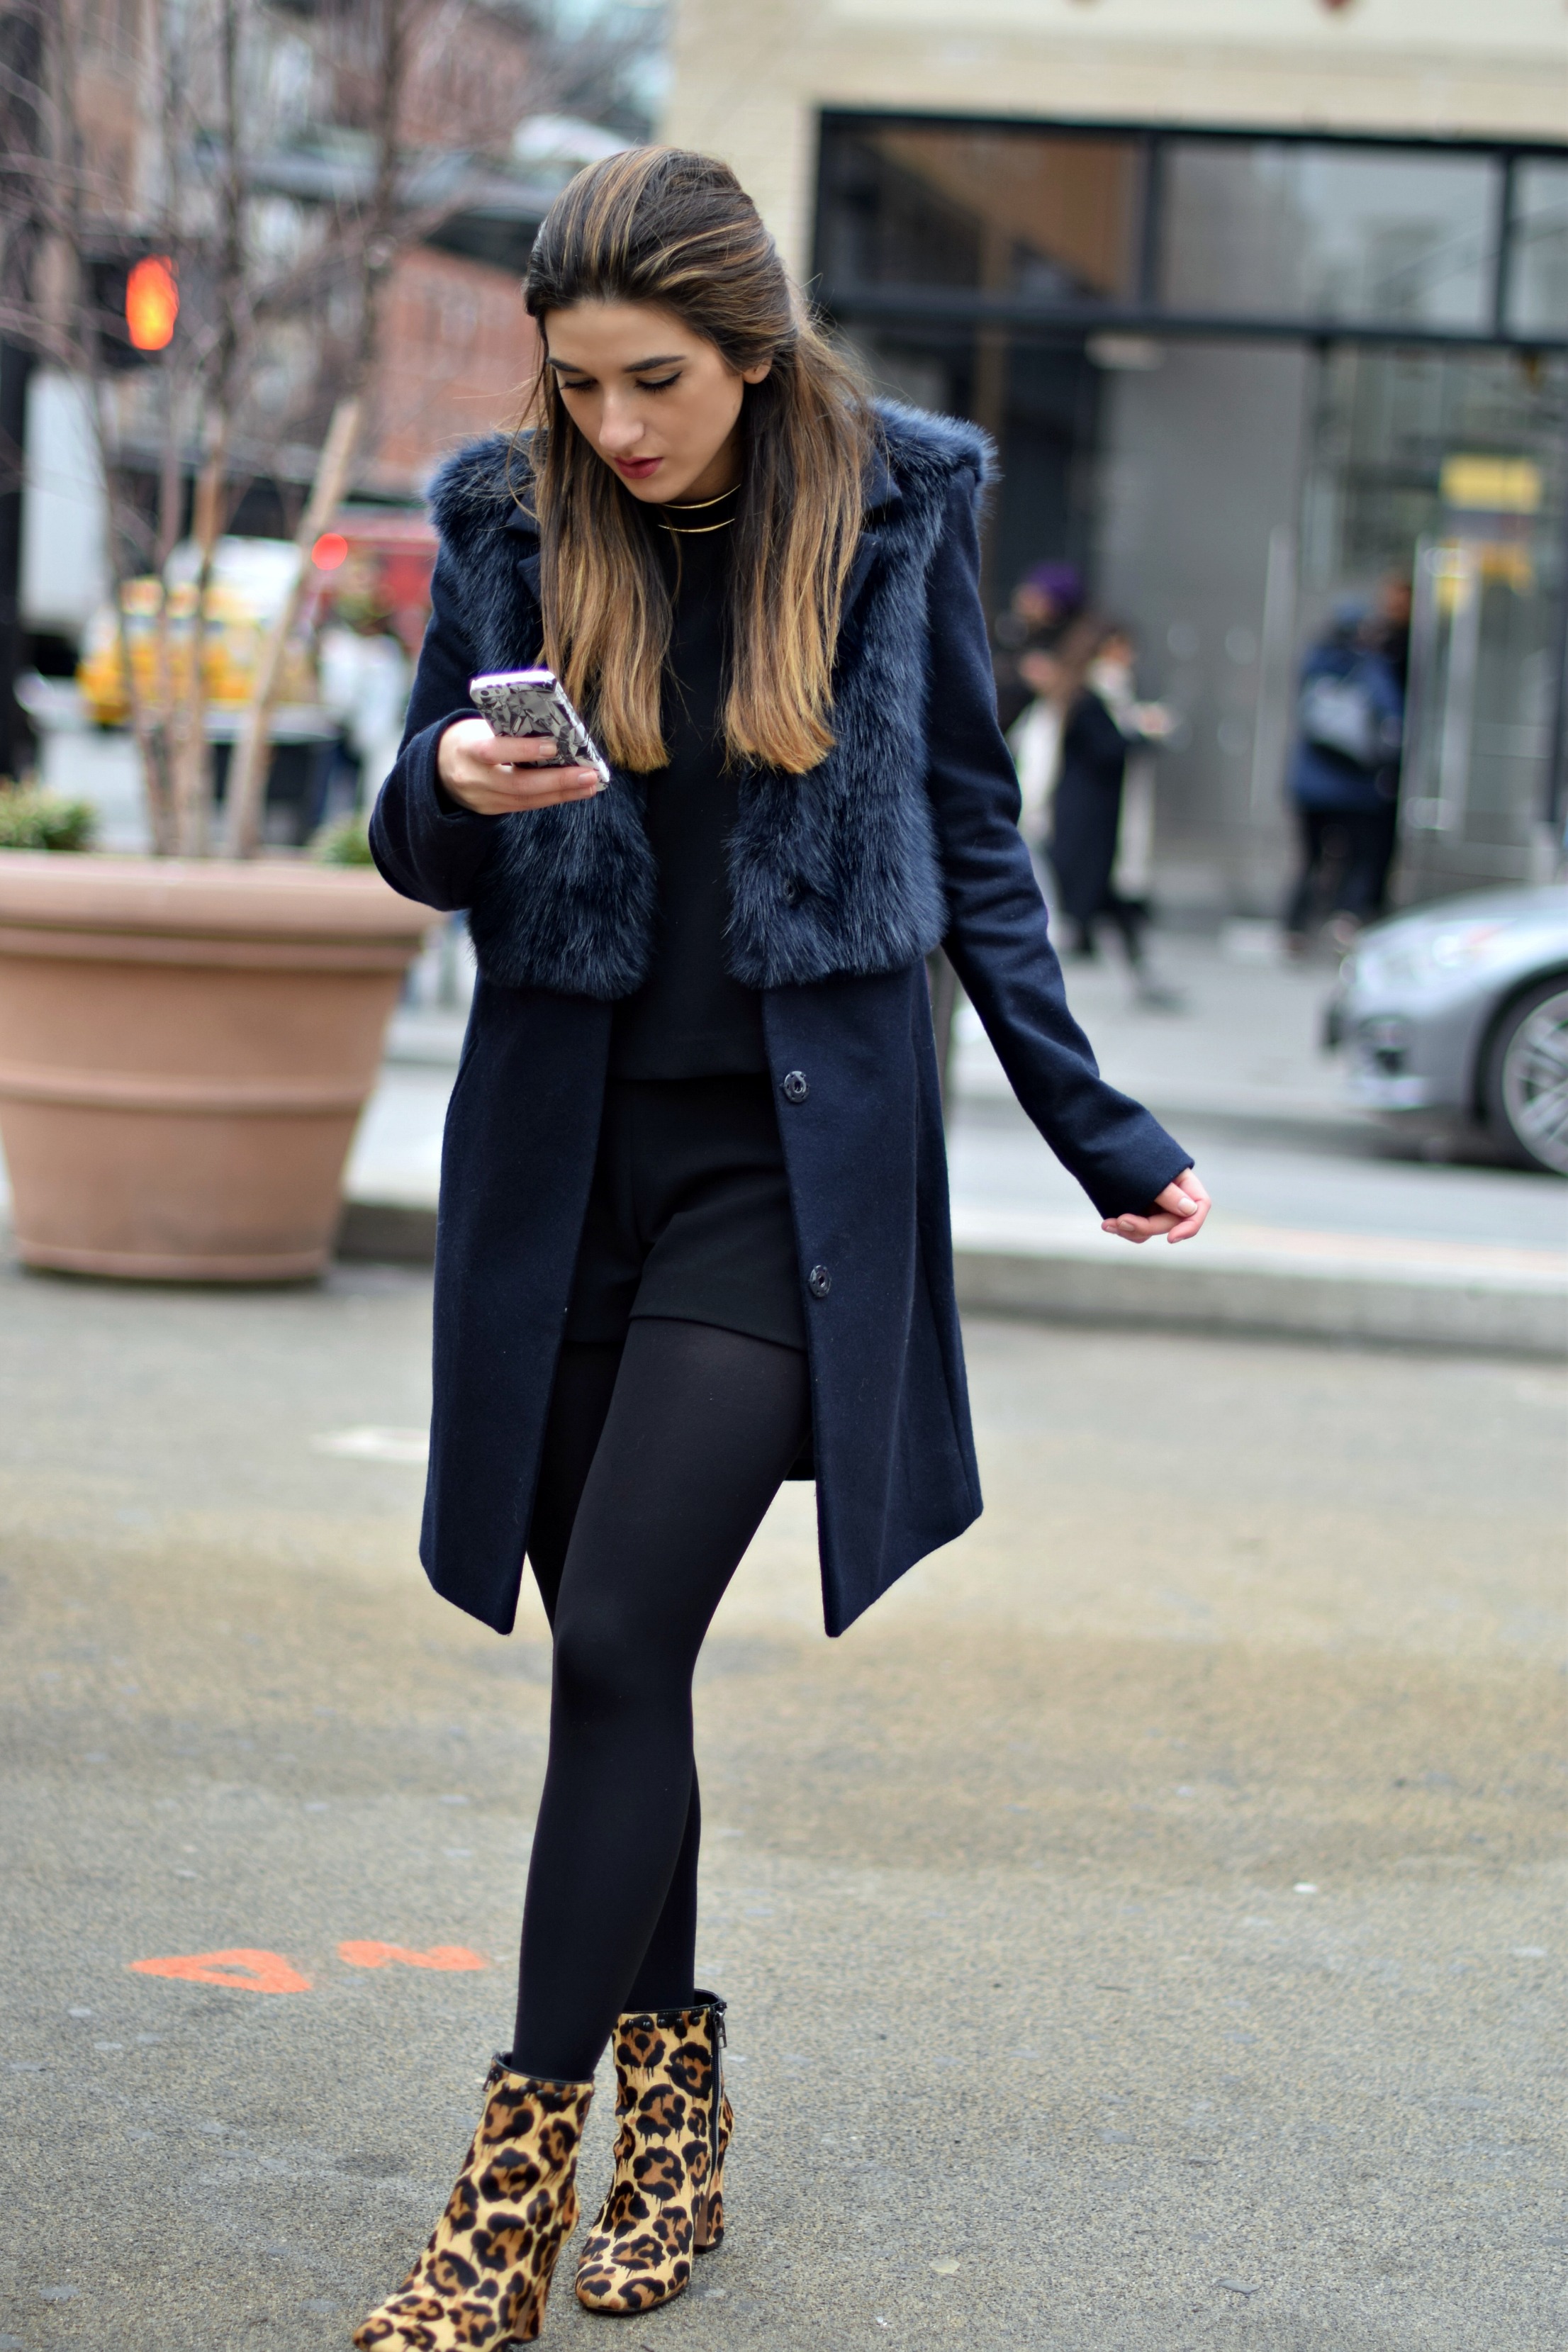 Navy Coat Coach Leopard Booties Louboutins & Love Fashion Blog Esther Santer NYC Street Style Blogger Outfit OOTD Fur Topshop Shopping Girl Women Swag Photoshoot Model Beautiful Winter Look NYFW Tights Ivanka Trump Soho Tote Ombre Hair City Lifestyle.jpg